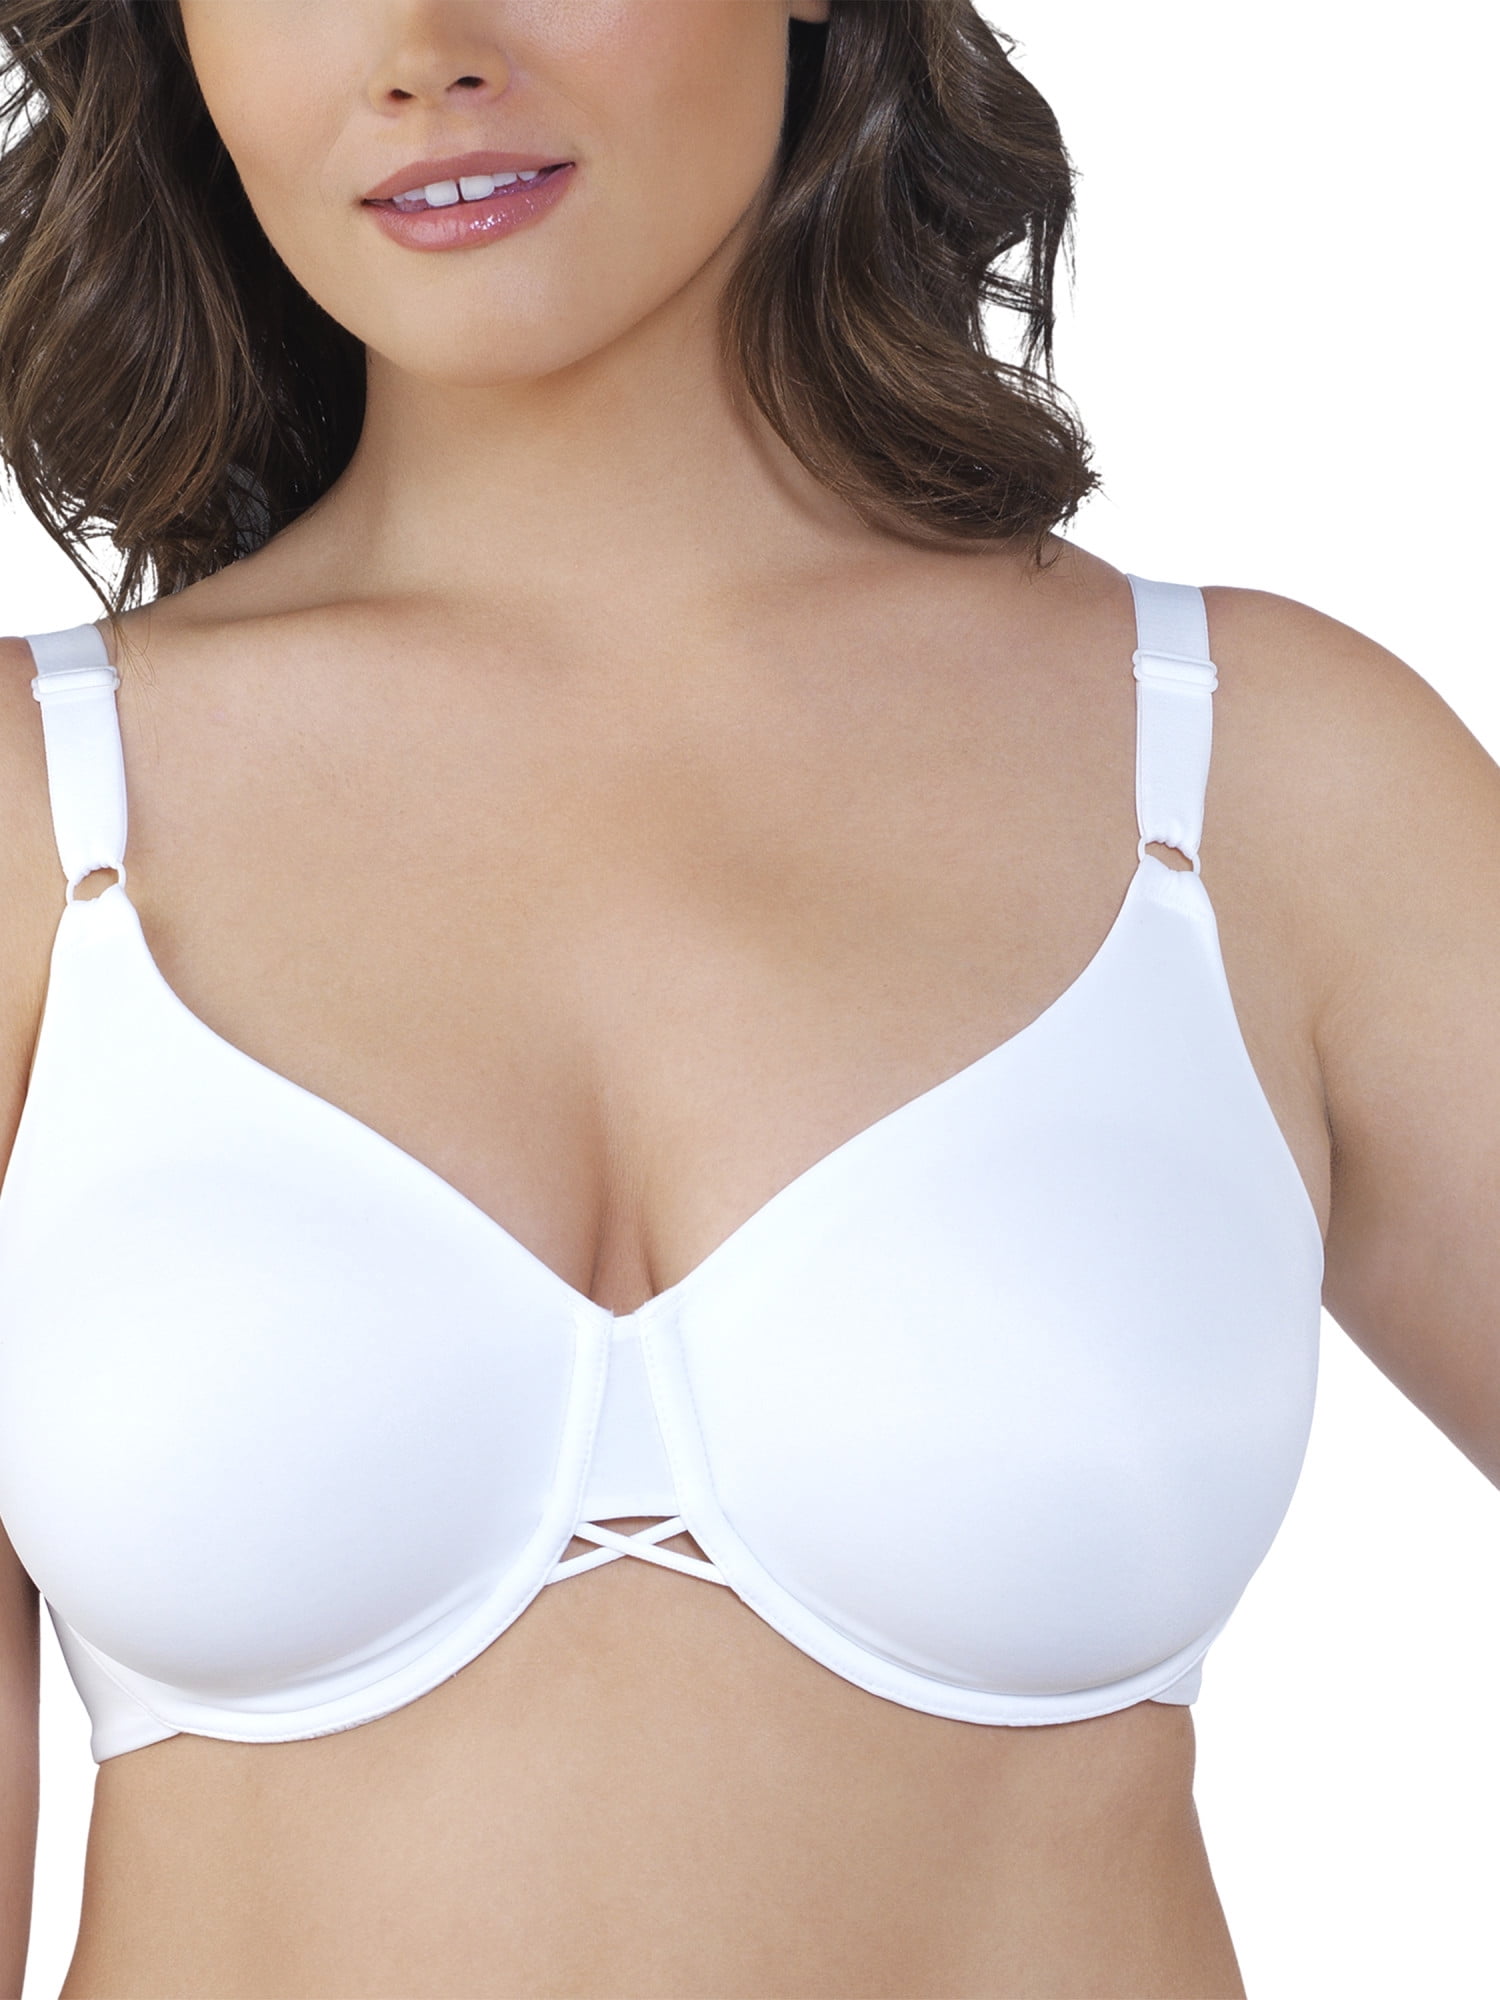 Woman Wearing Wrong Size Bra Stock Photo - Image of scoop, size: 289497774